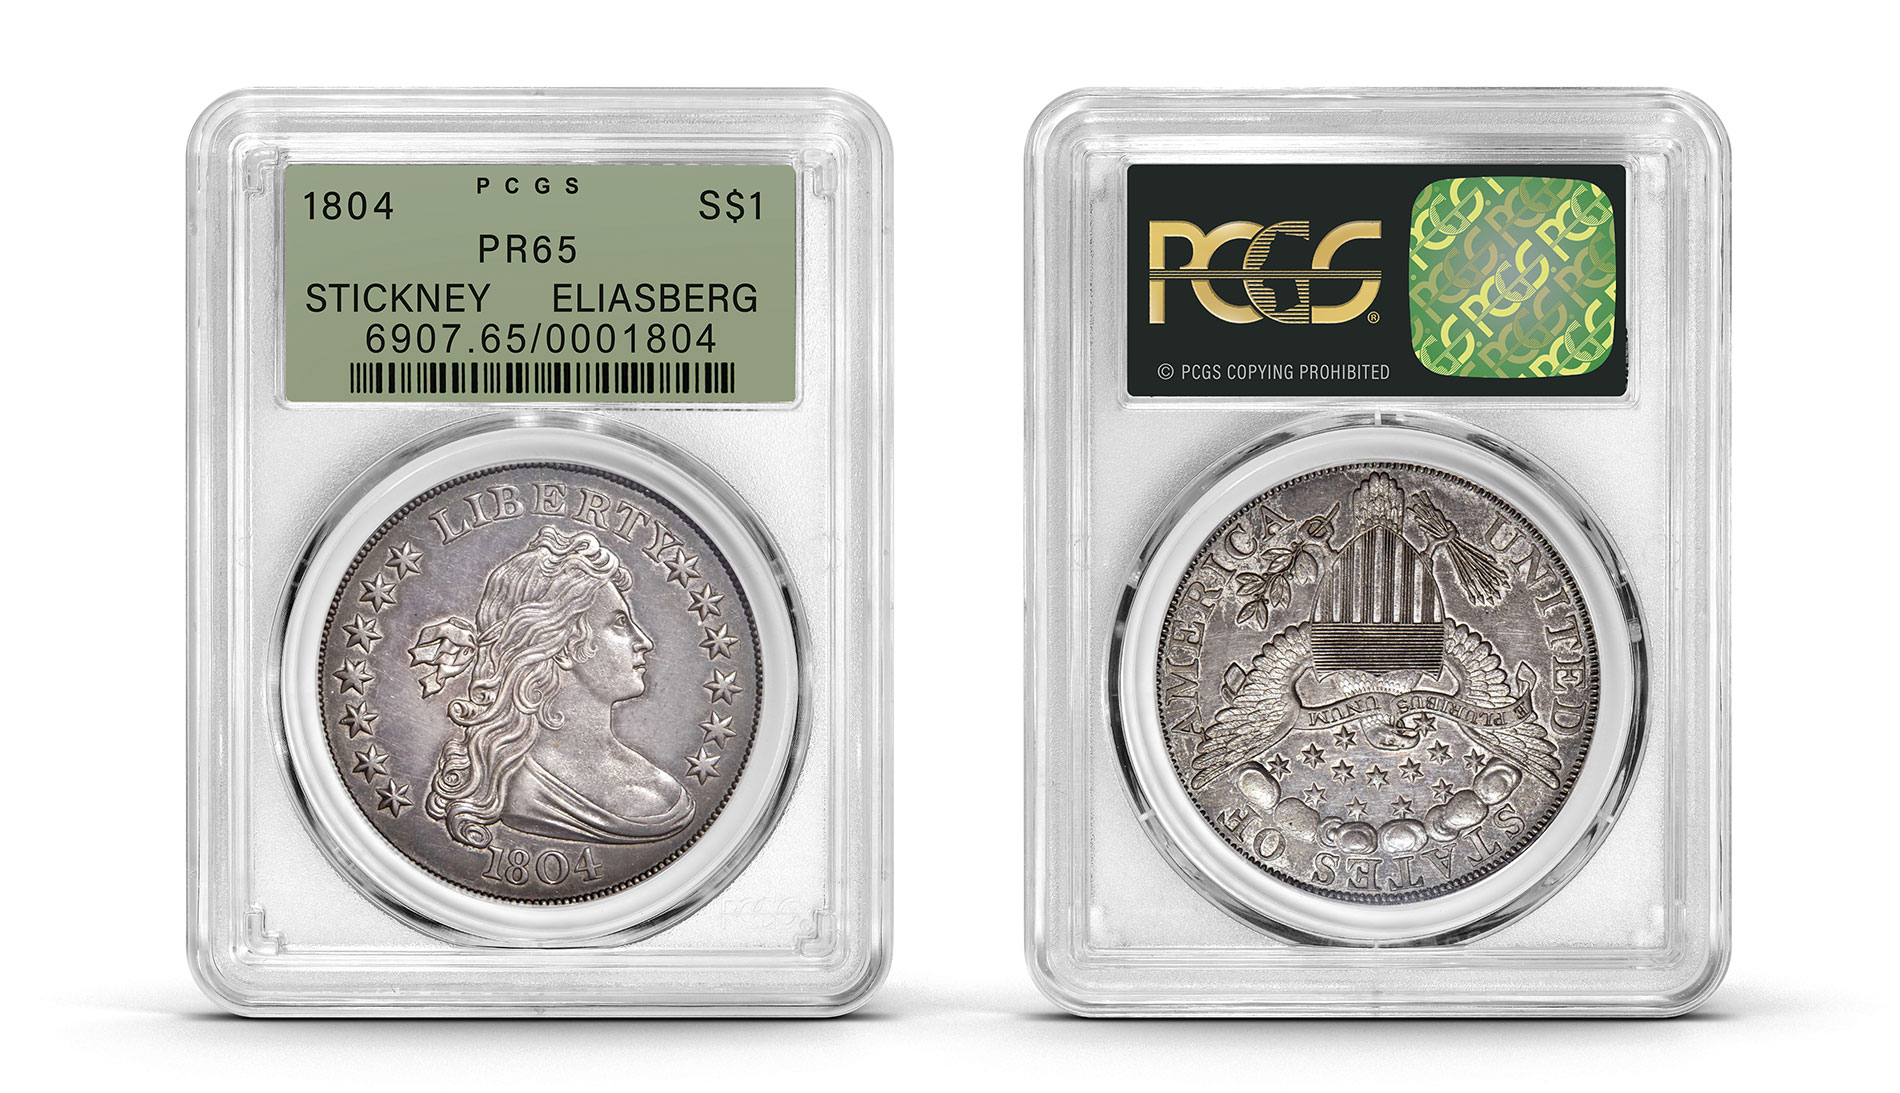 PCGS vs NGC: Which One is Better to Get your Coins Graded by? #PCGS #NGC  #coingrading 